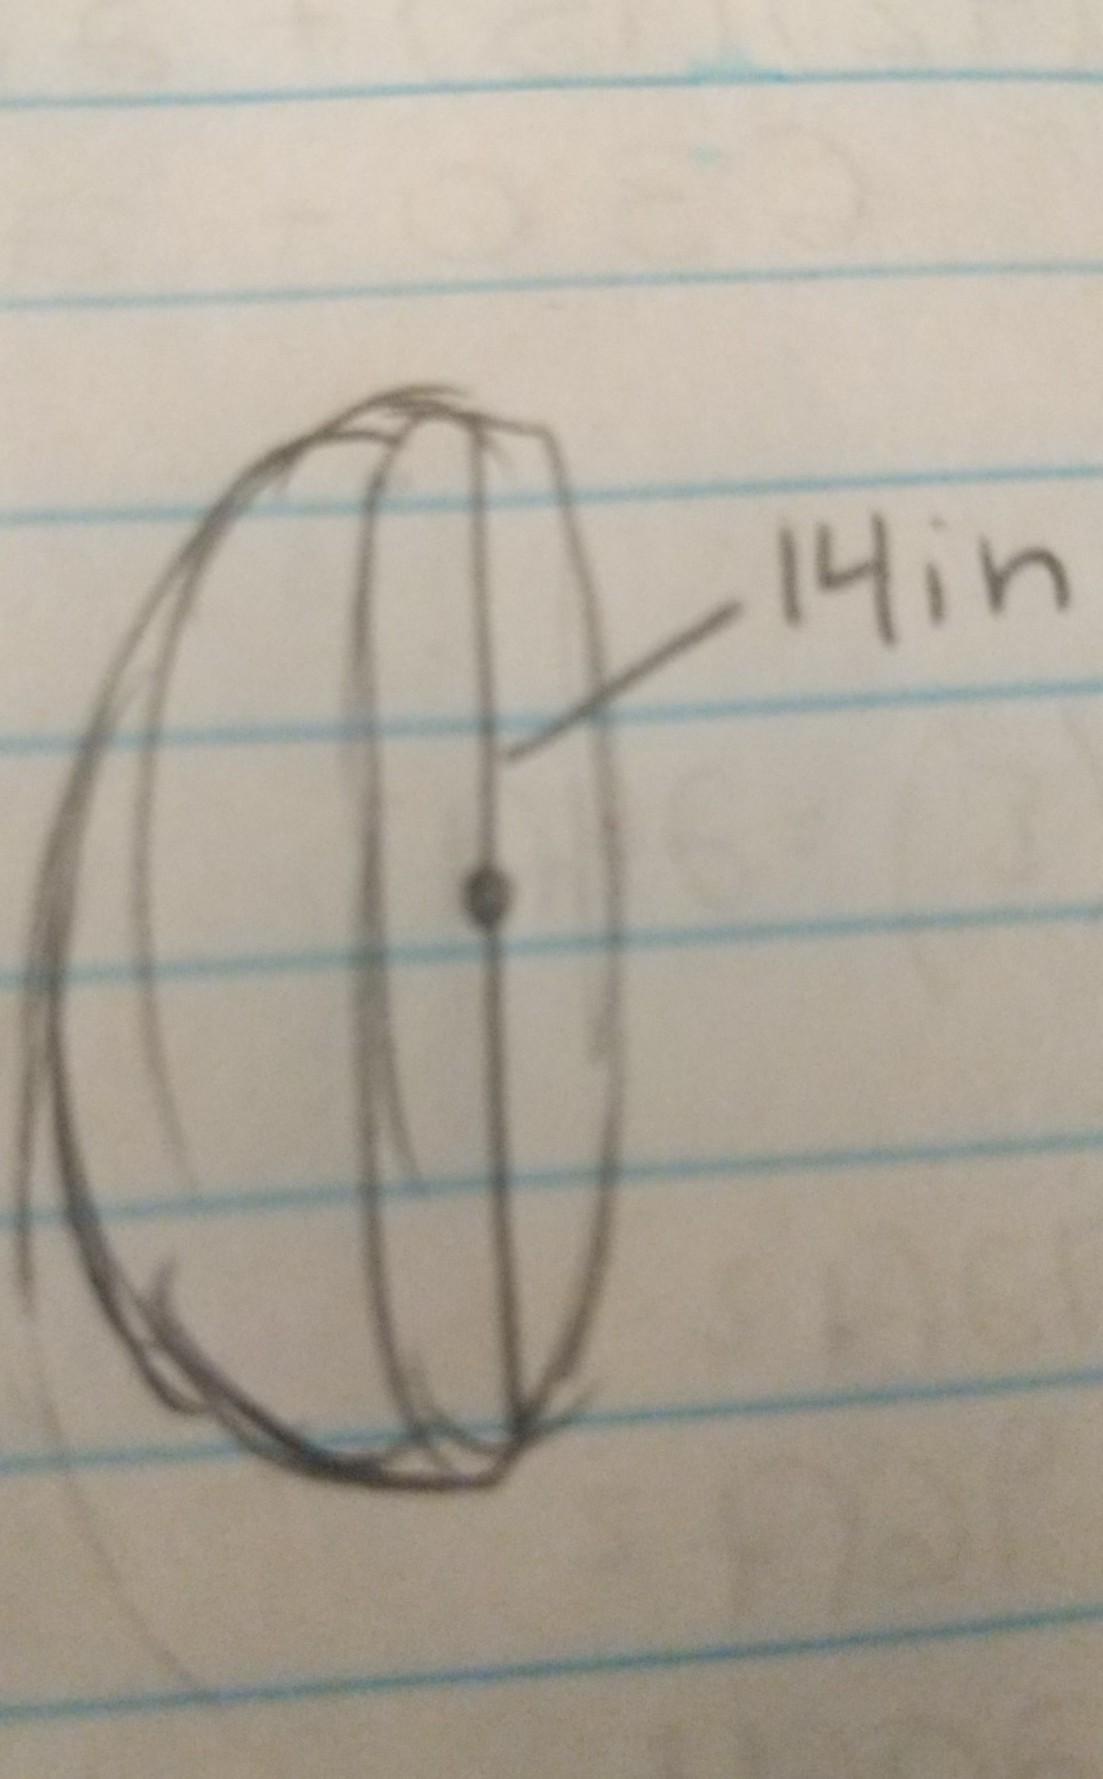 I Need To Find The Surface Area. It's A Cut Sphere With A Diameter Of 14.